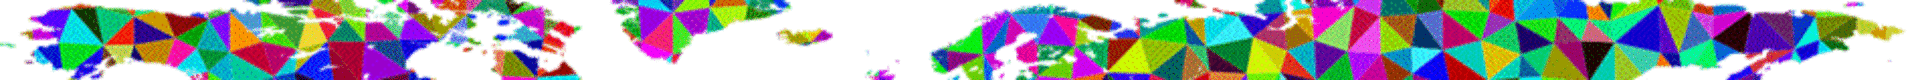 cropped-colorful-1-2.gif